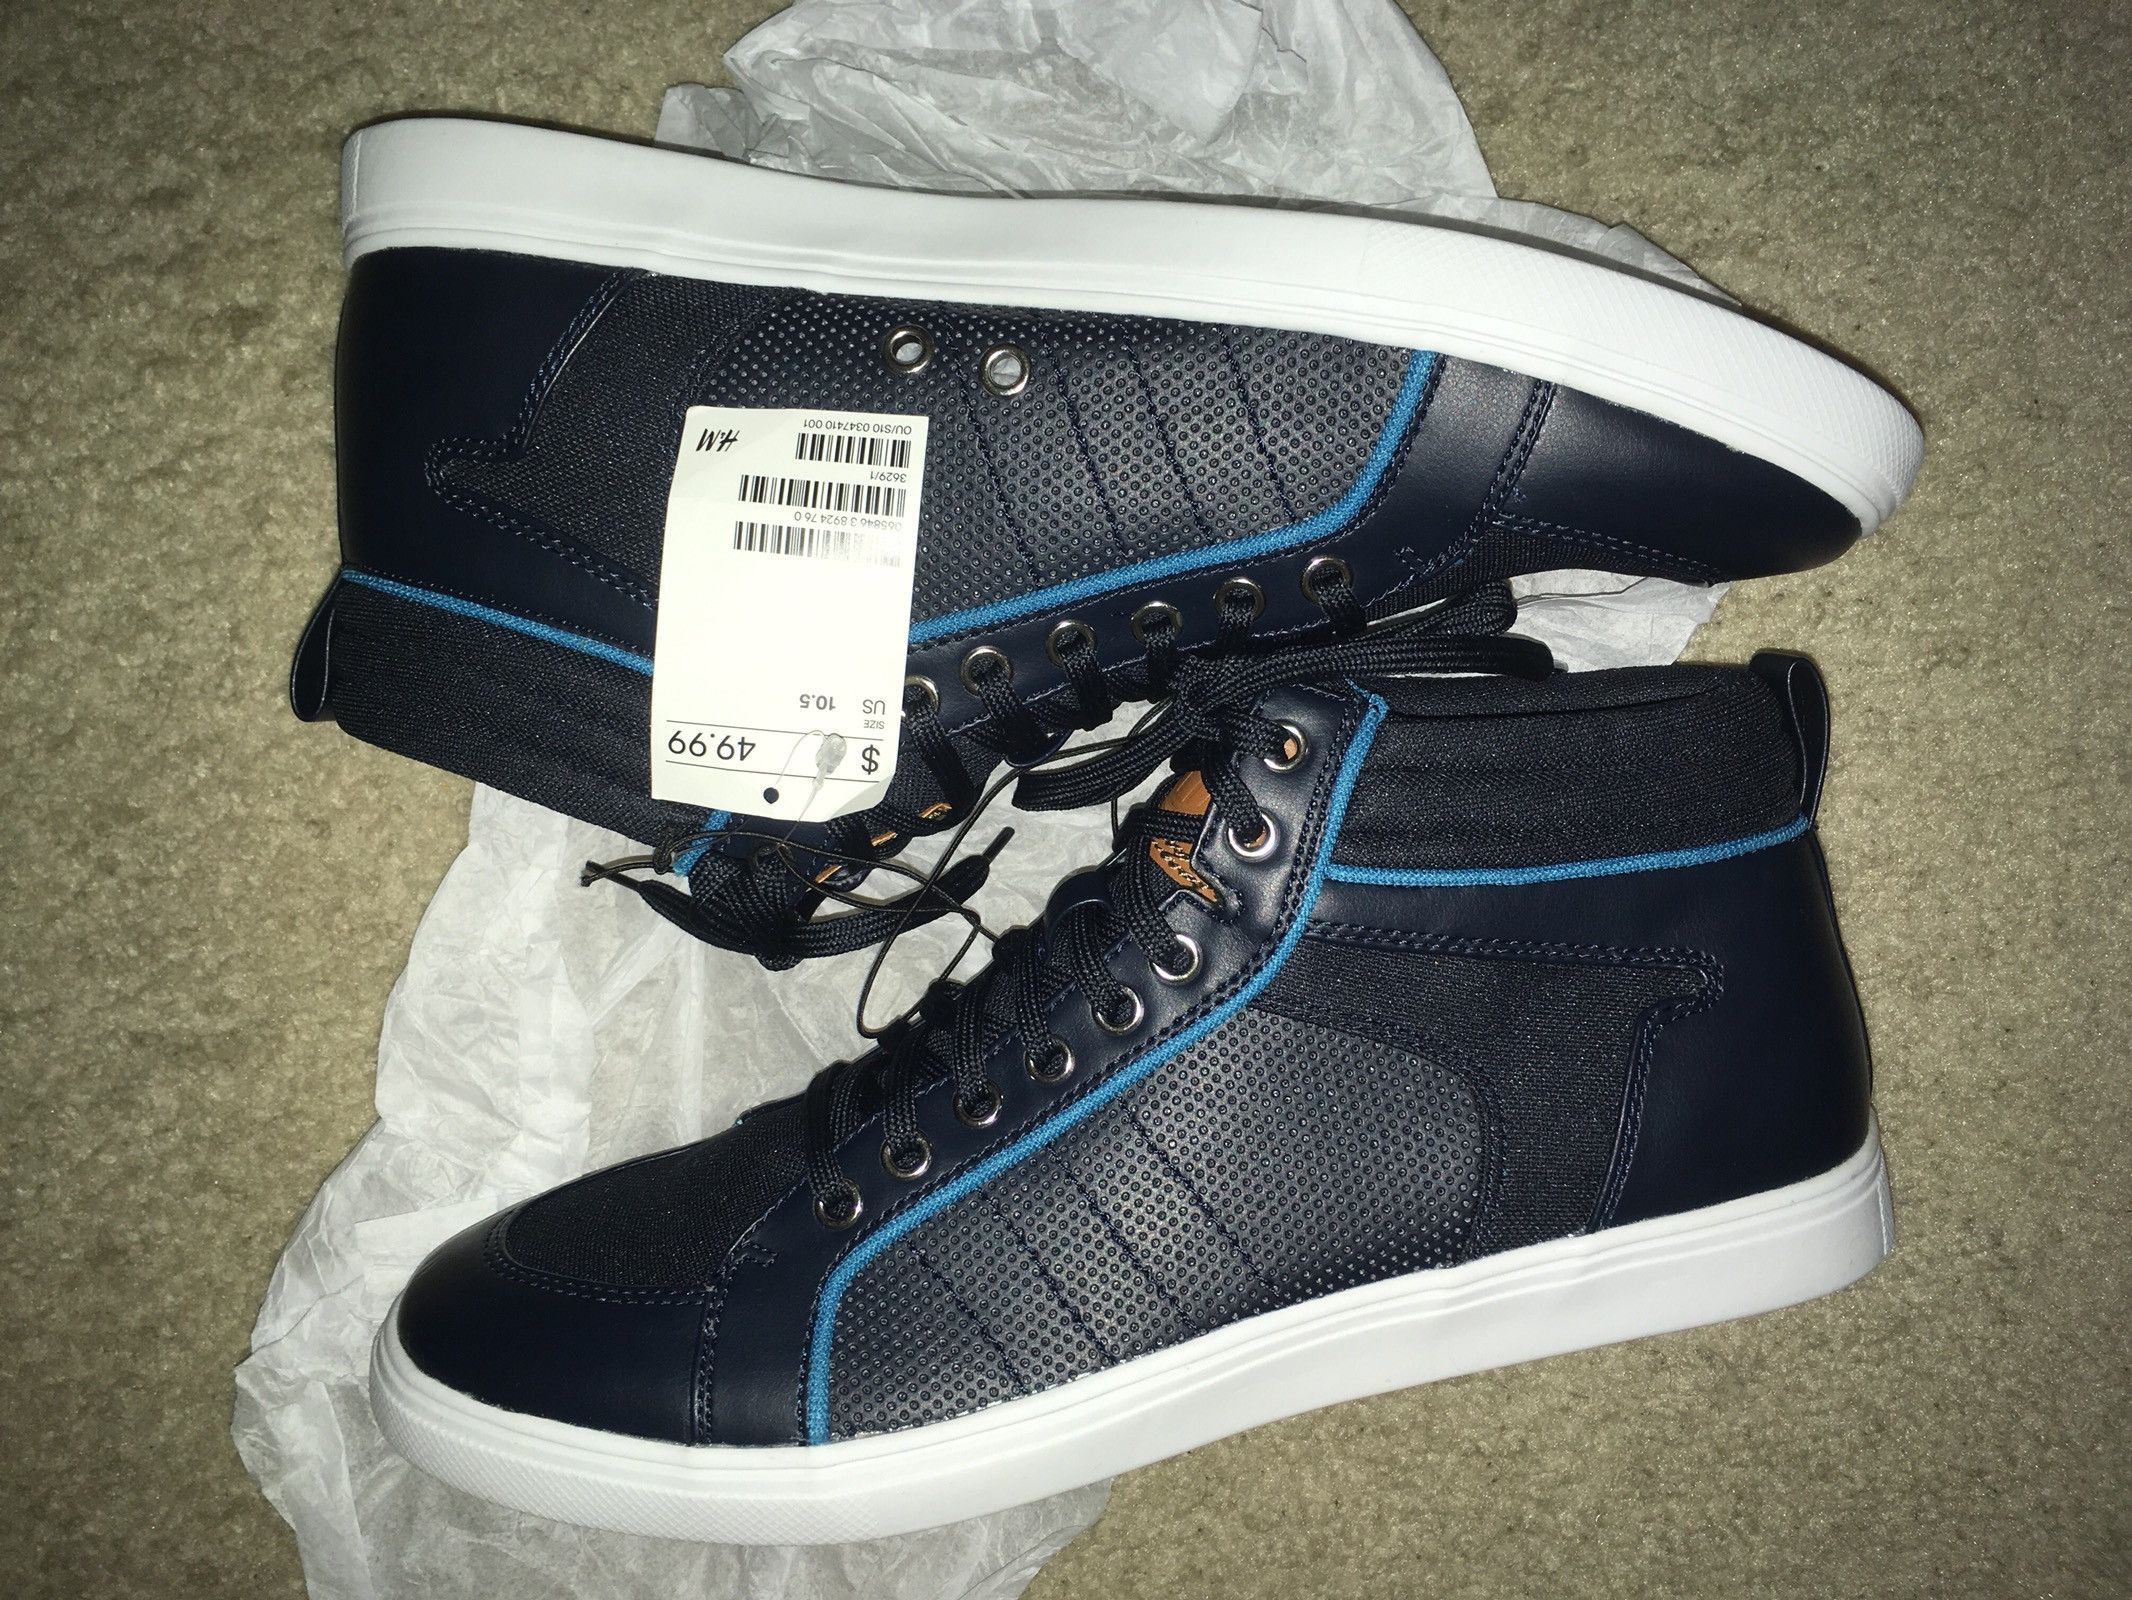 H&M Navy Blue High Top Sneakers Size US 10.5 / EU 43-44 - 2 Preview